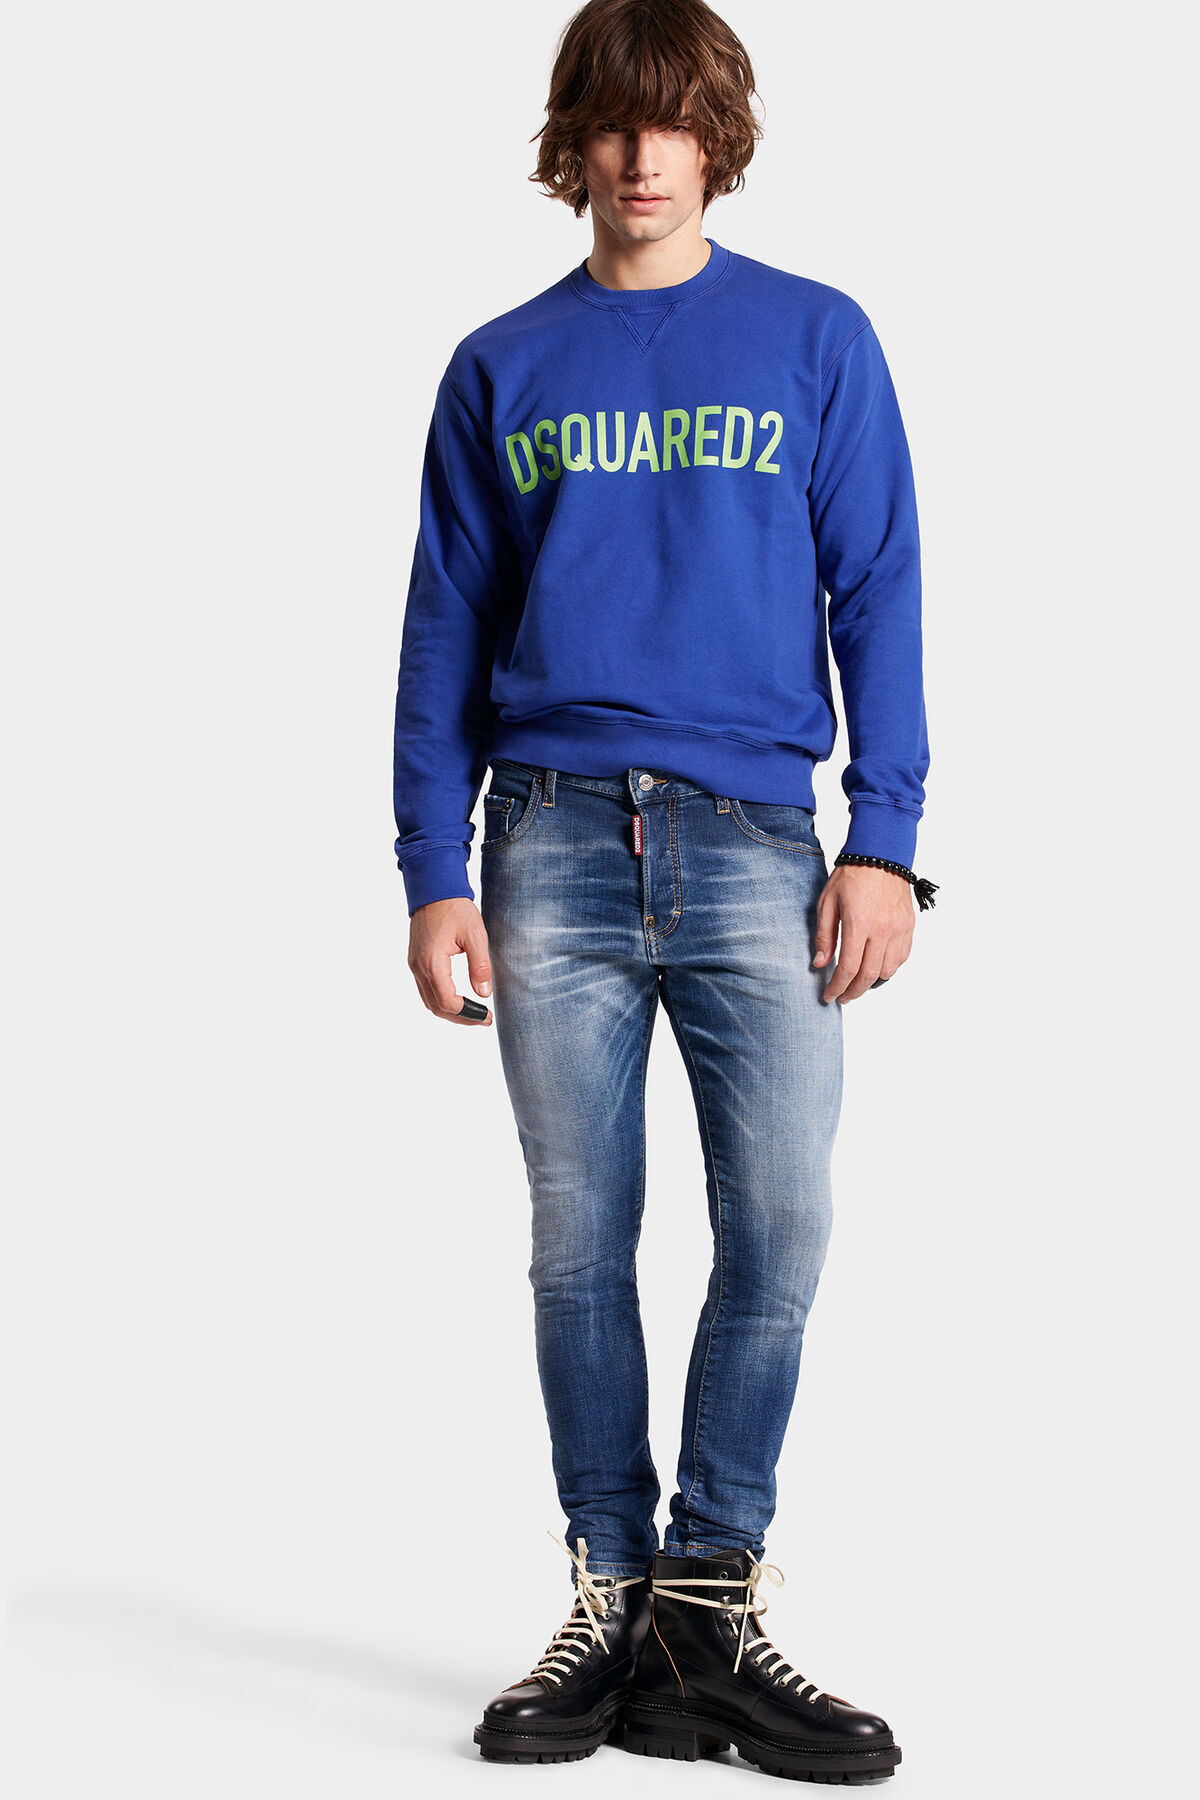 DSQUARED2 Jeans Skater in Washed Blue 52